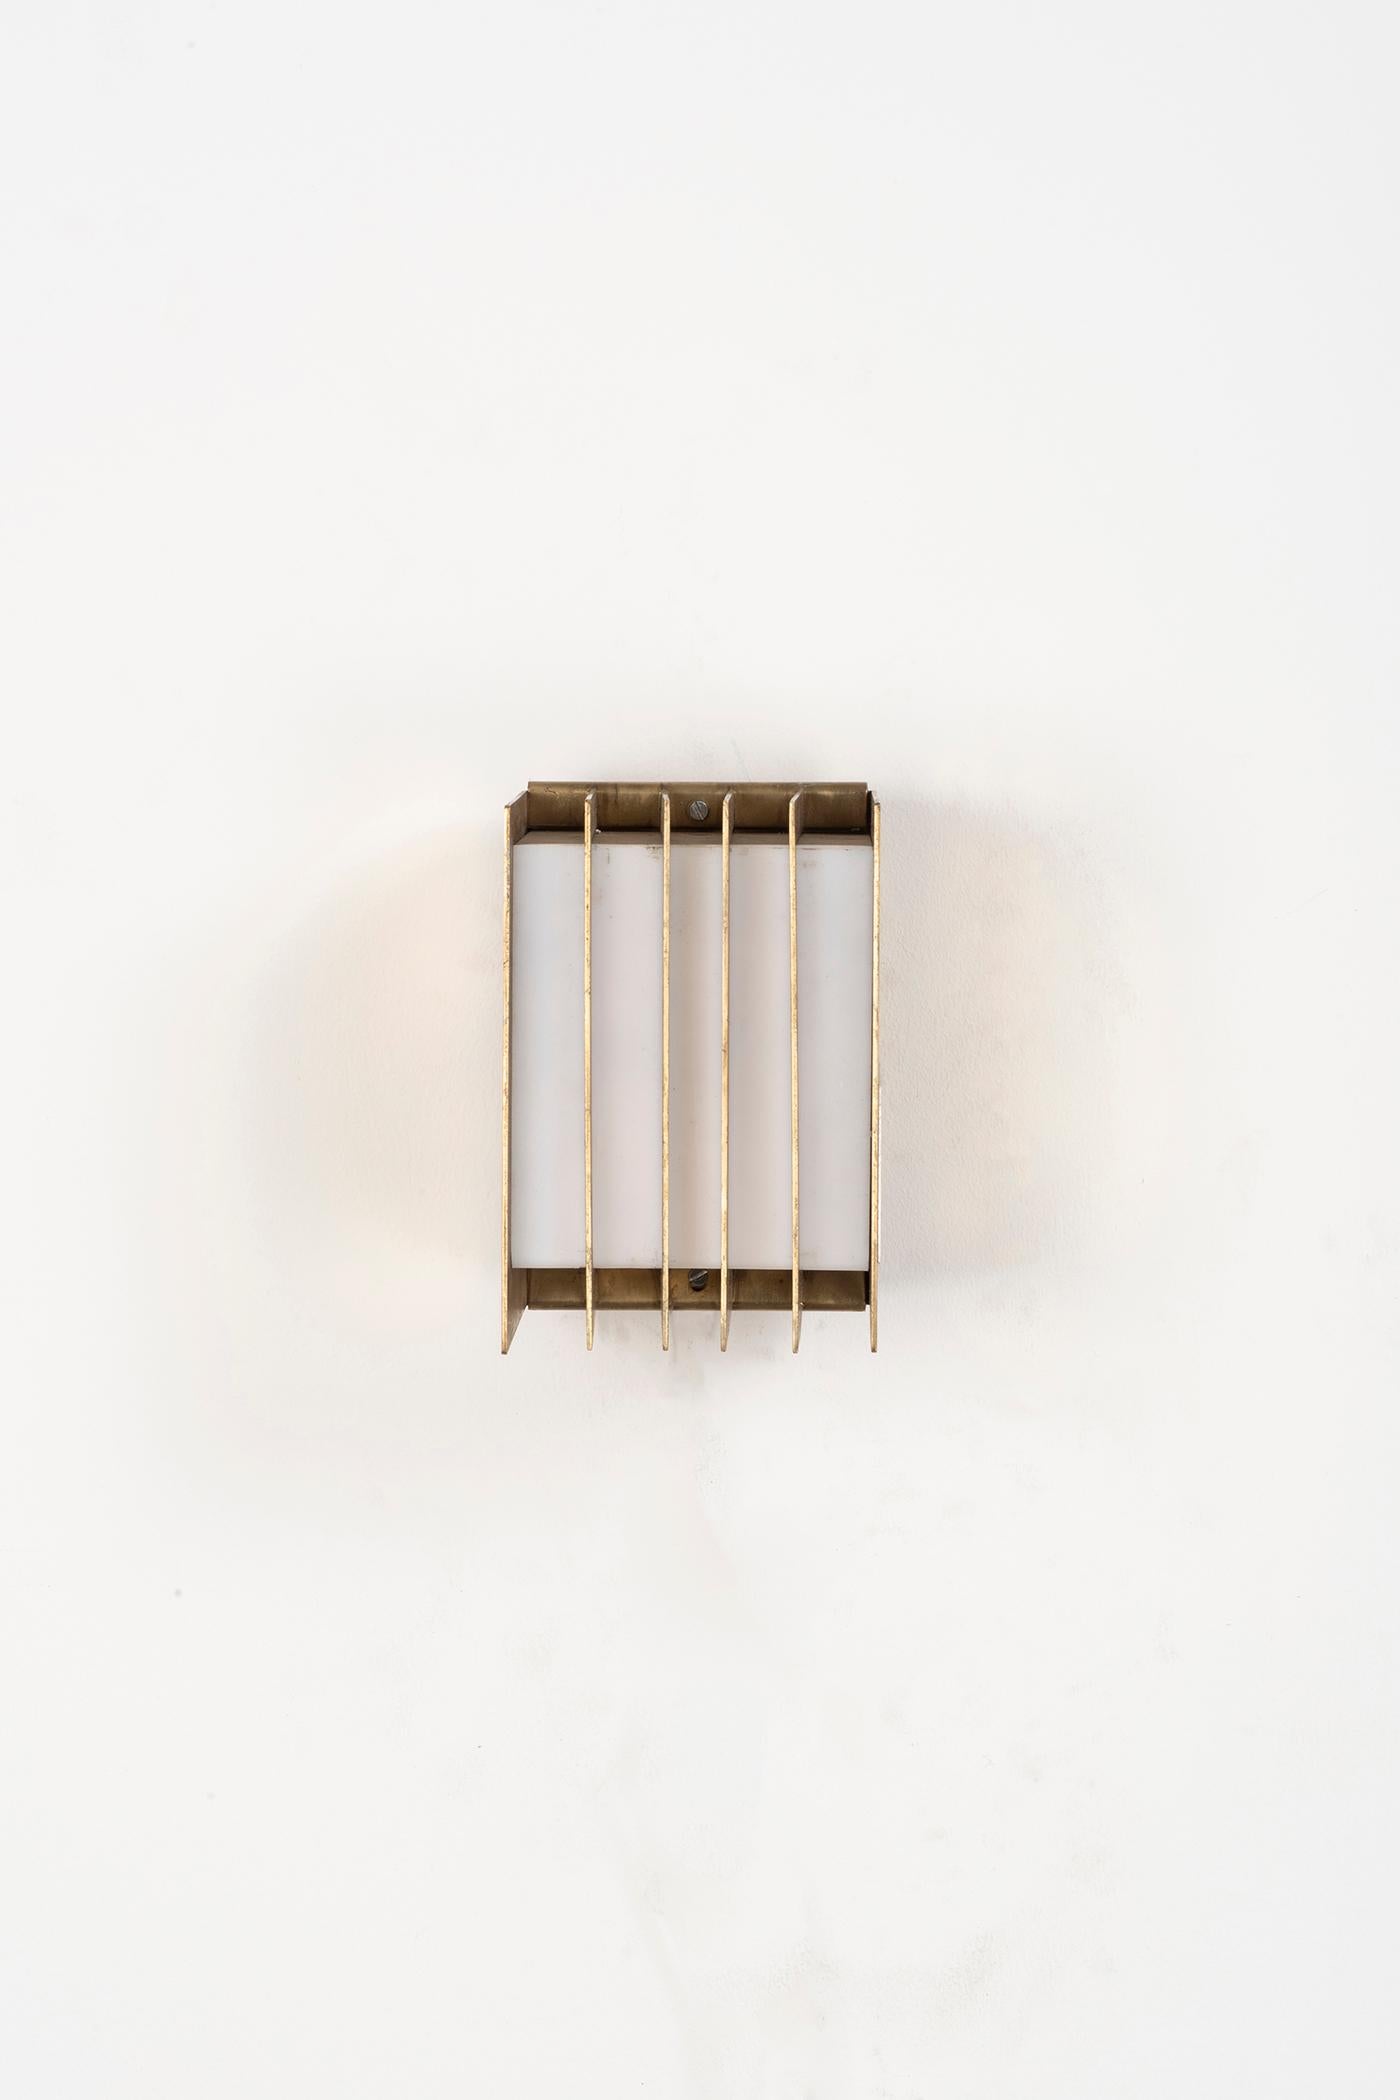 Thirteen wall lamps by Lars Gunnar-Nordstro¨m.
Finland, circa 1970. Provenance: Hotel Hesperia, Helsinki. Brass, plexiglass. 21.5 x 12.5 x H 20 cm. 8.4 x 4.9 x H 7.8 in.
Please note: Prices do not include VAT. VAT may be applied depending on the